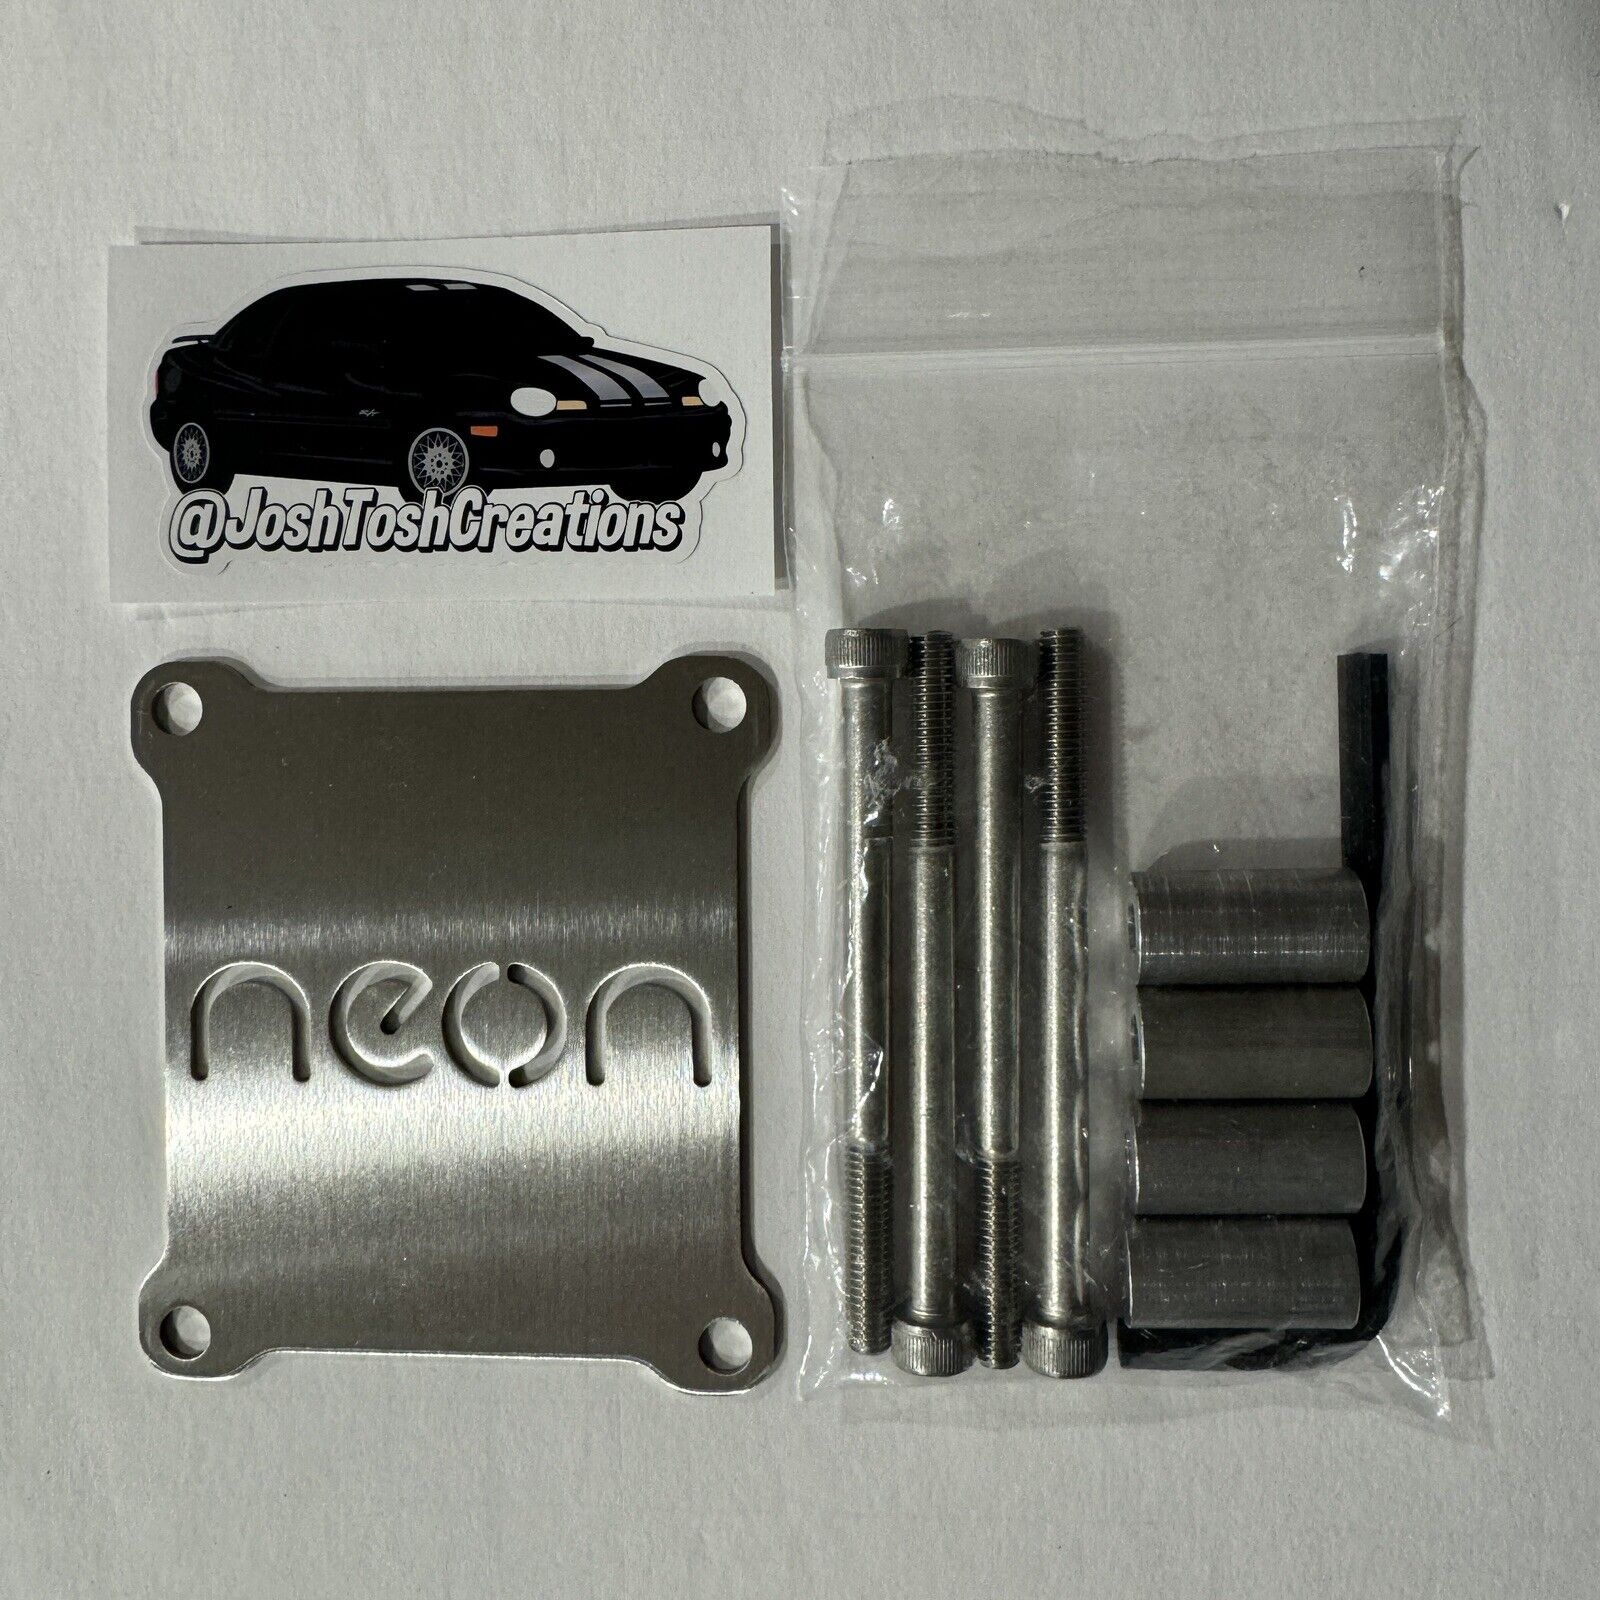 Neon 95-99 Coil Pack Cover - “neon” 304 SS